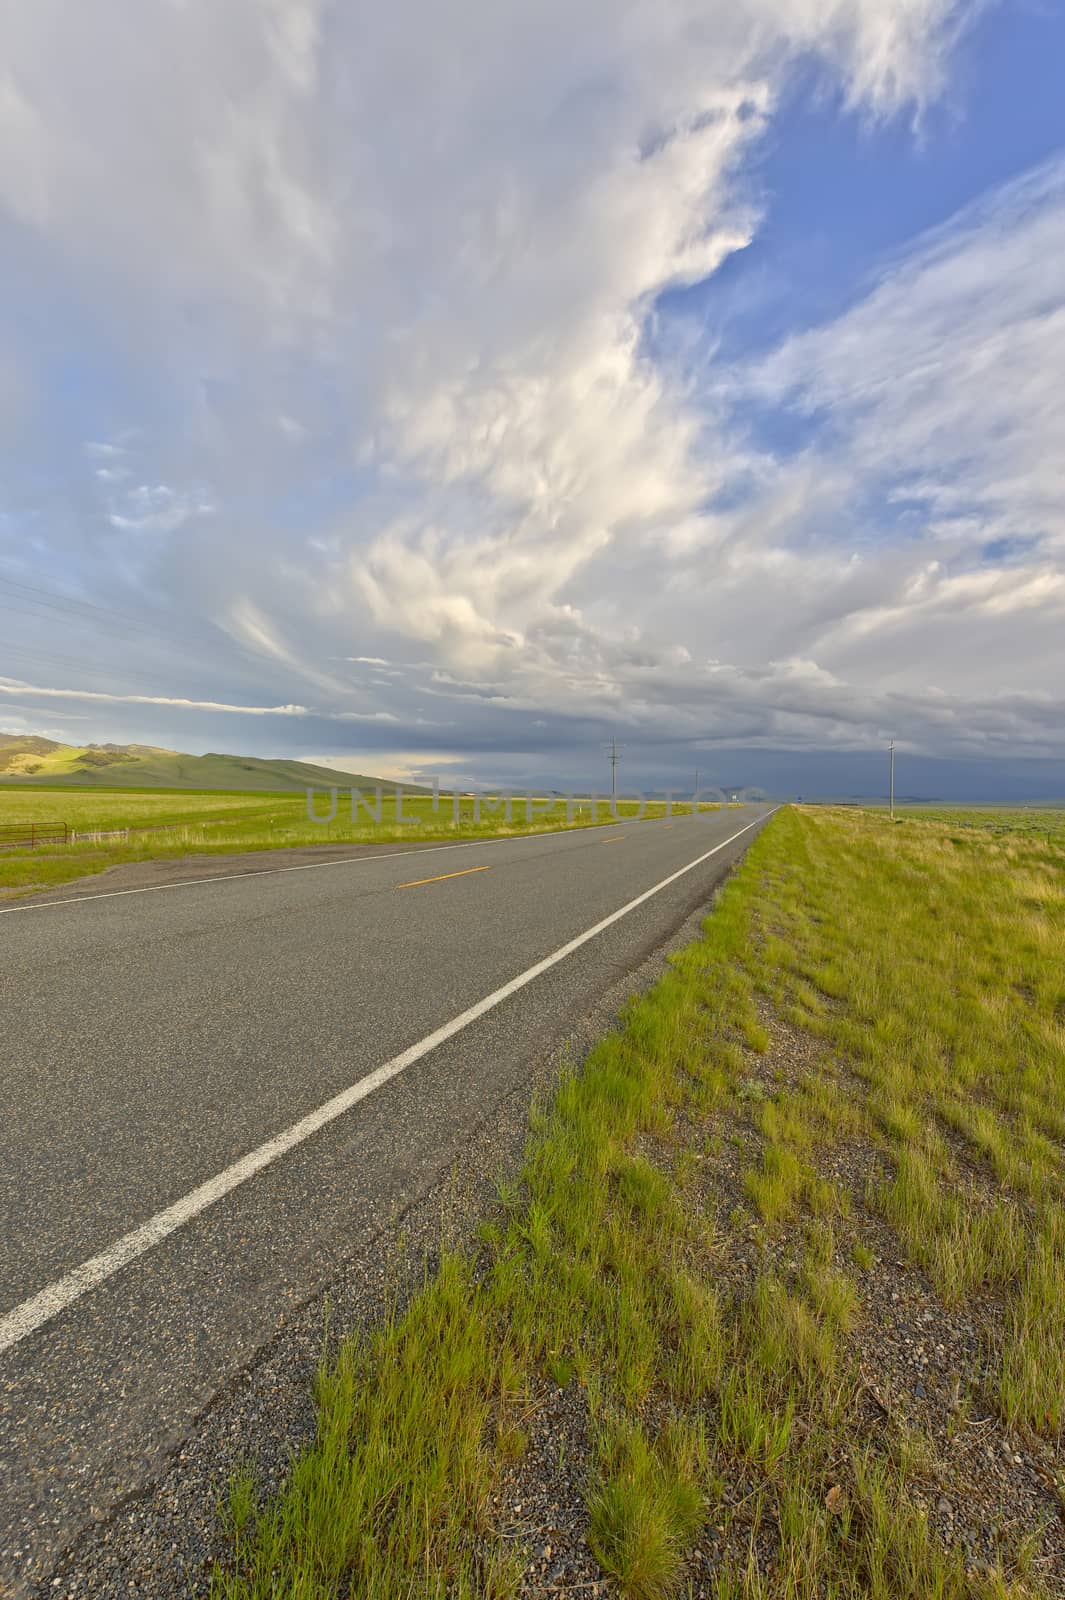 A thunderstorm building up in the distance over a deserted road in Montana.